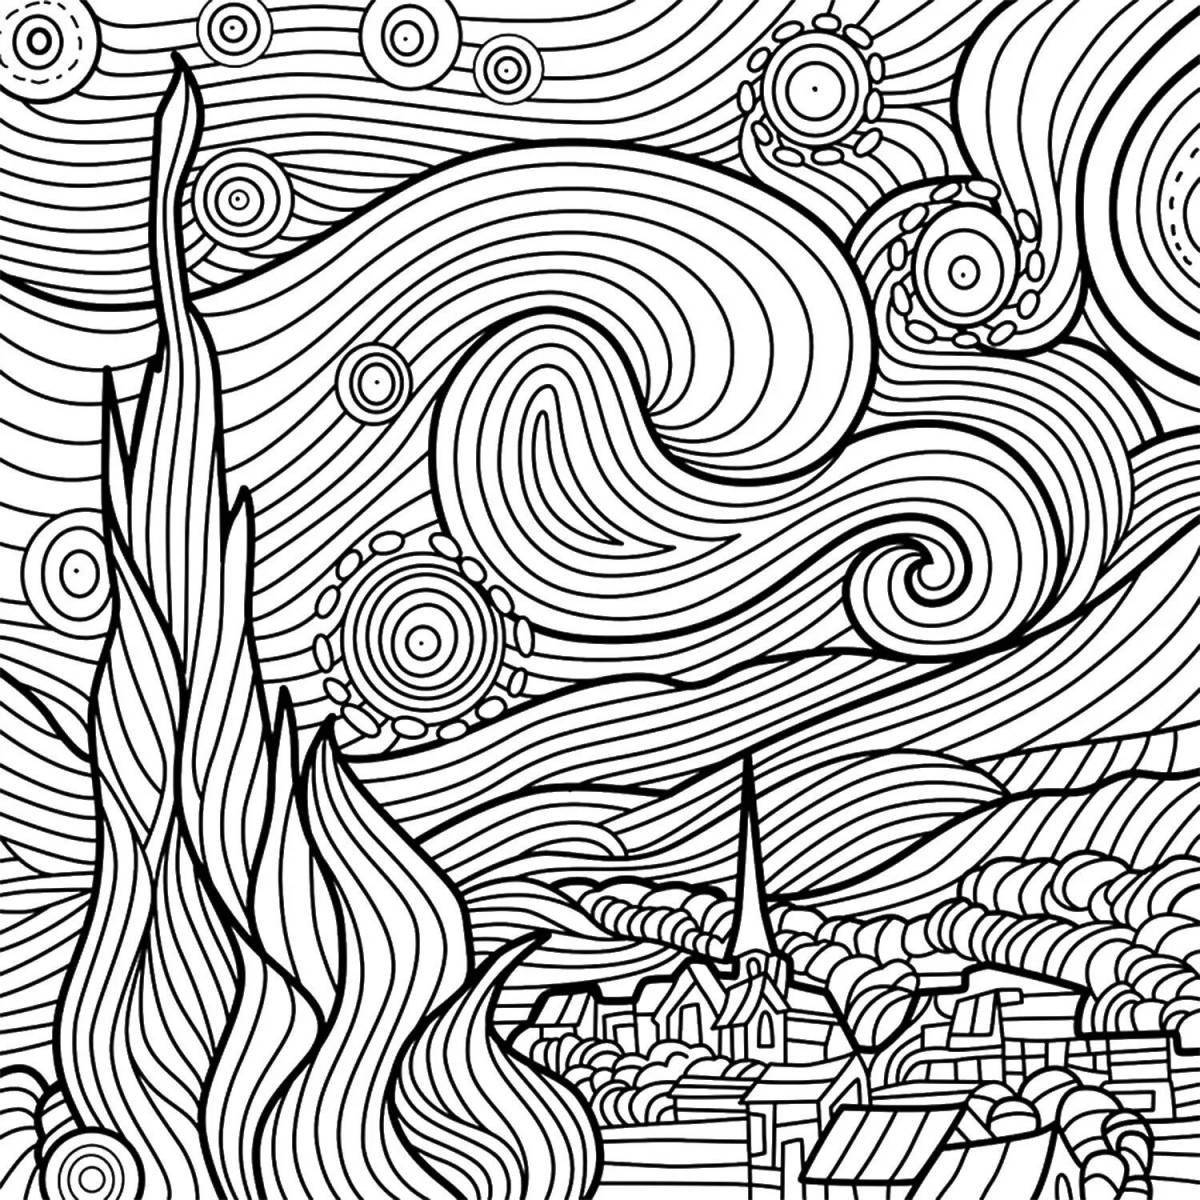 Exciting spiral improvisation coloring book